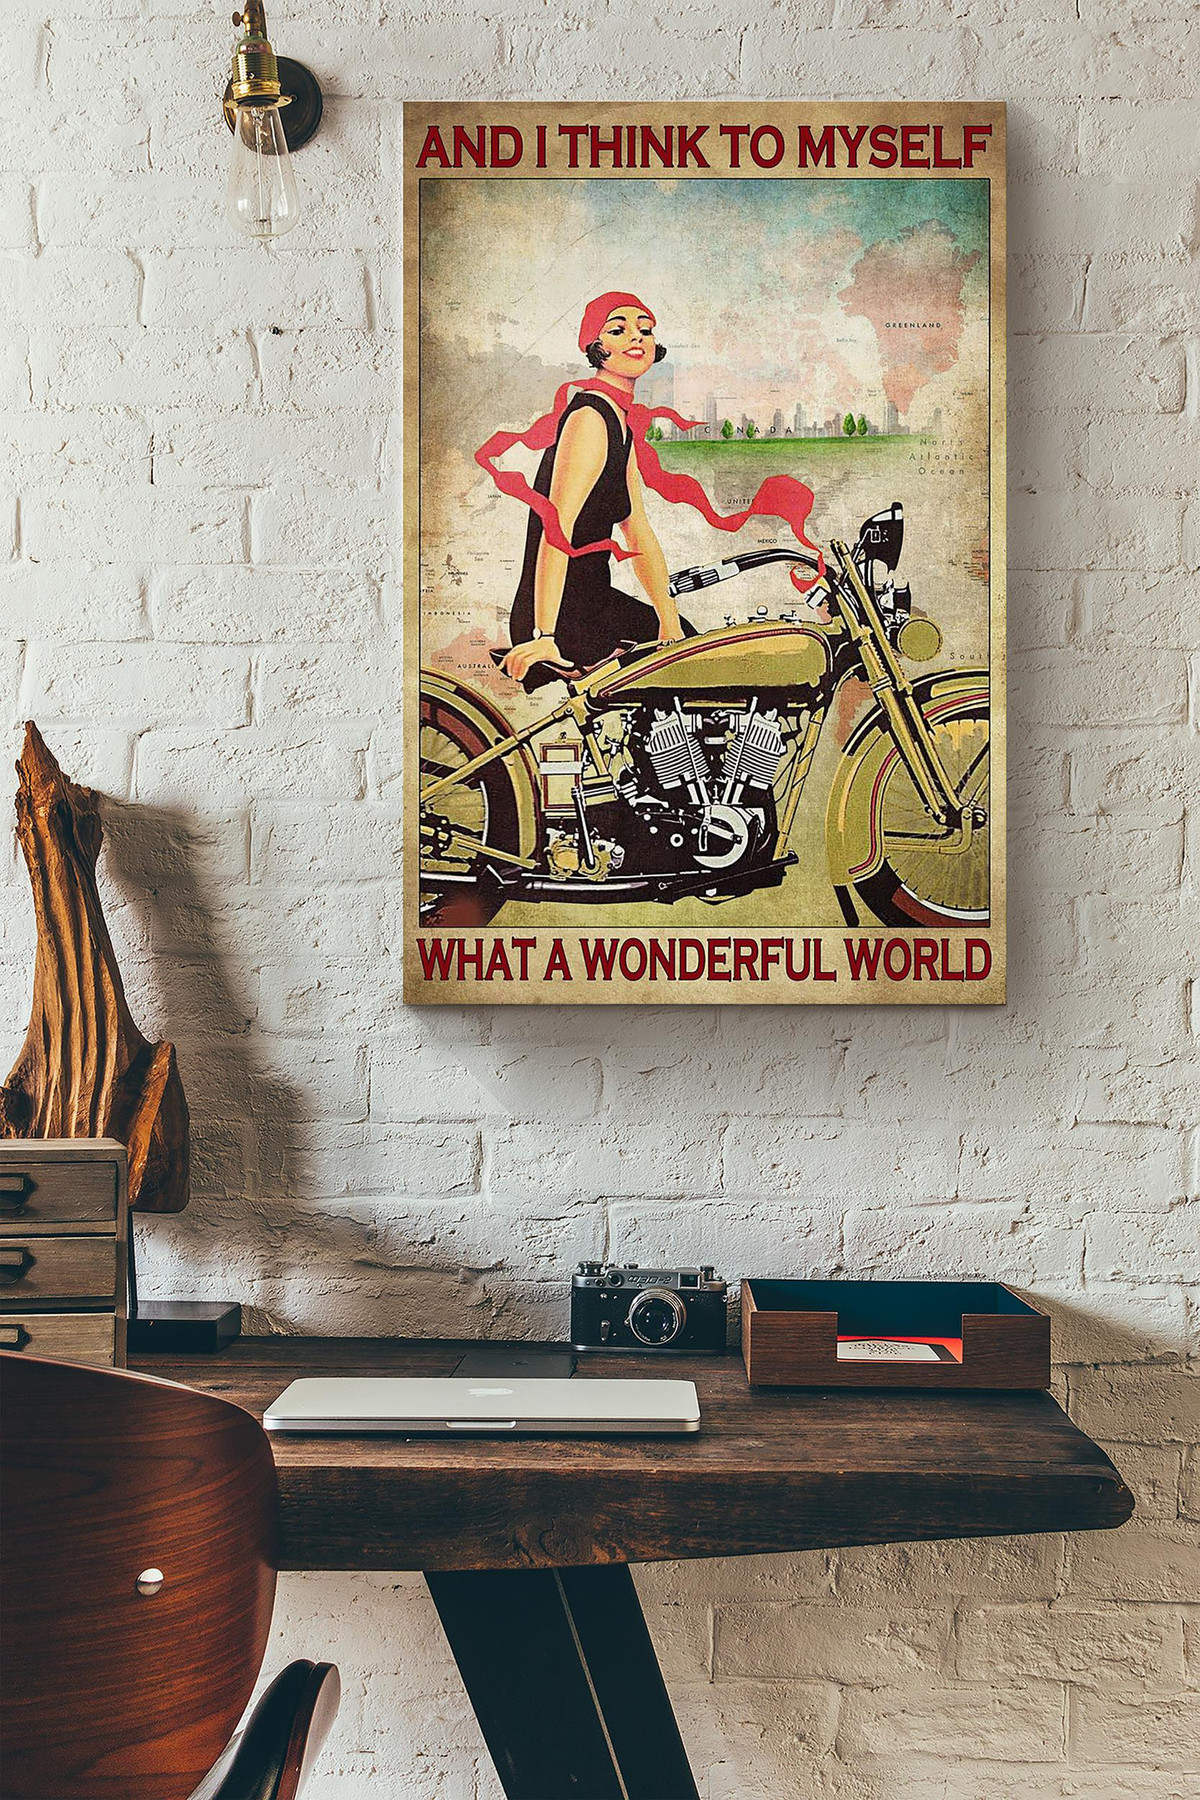 Im A Girl Riding Motorbike And I Think To Myself What A Wonderful World Canvas Painting Ideas, Canvas Hanging Prints, Gift Idea Framed Prints, Canvas Paintings Wrapped Canvas 8x10